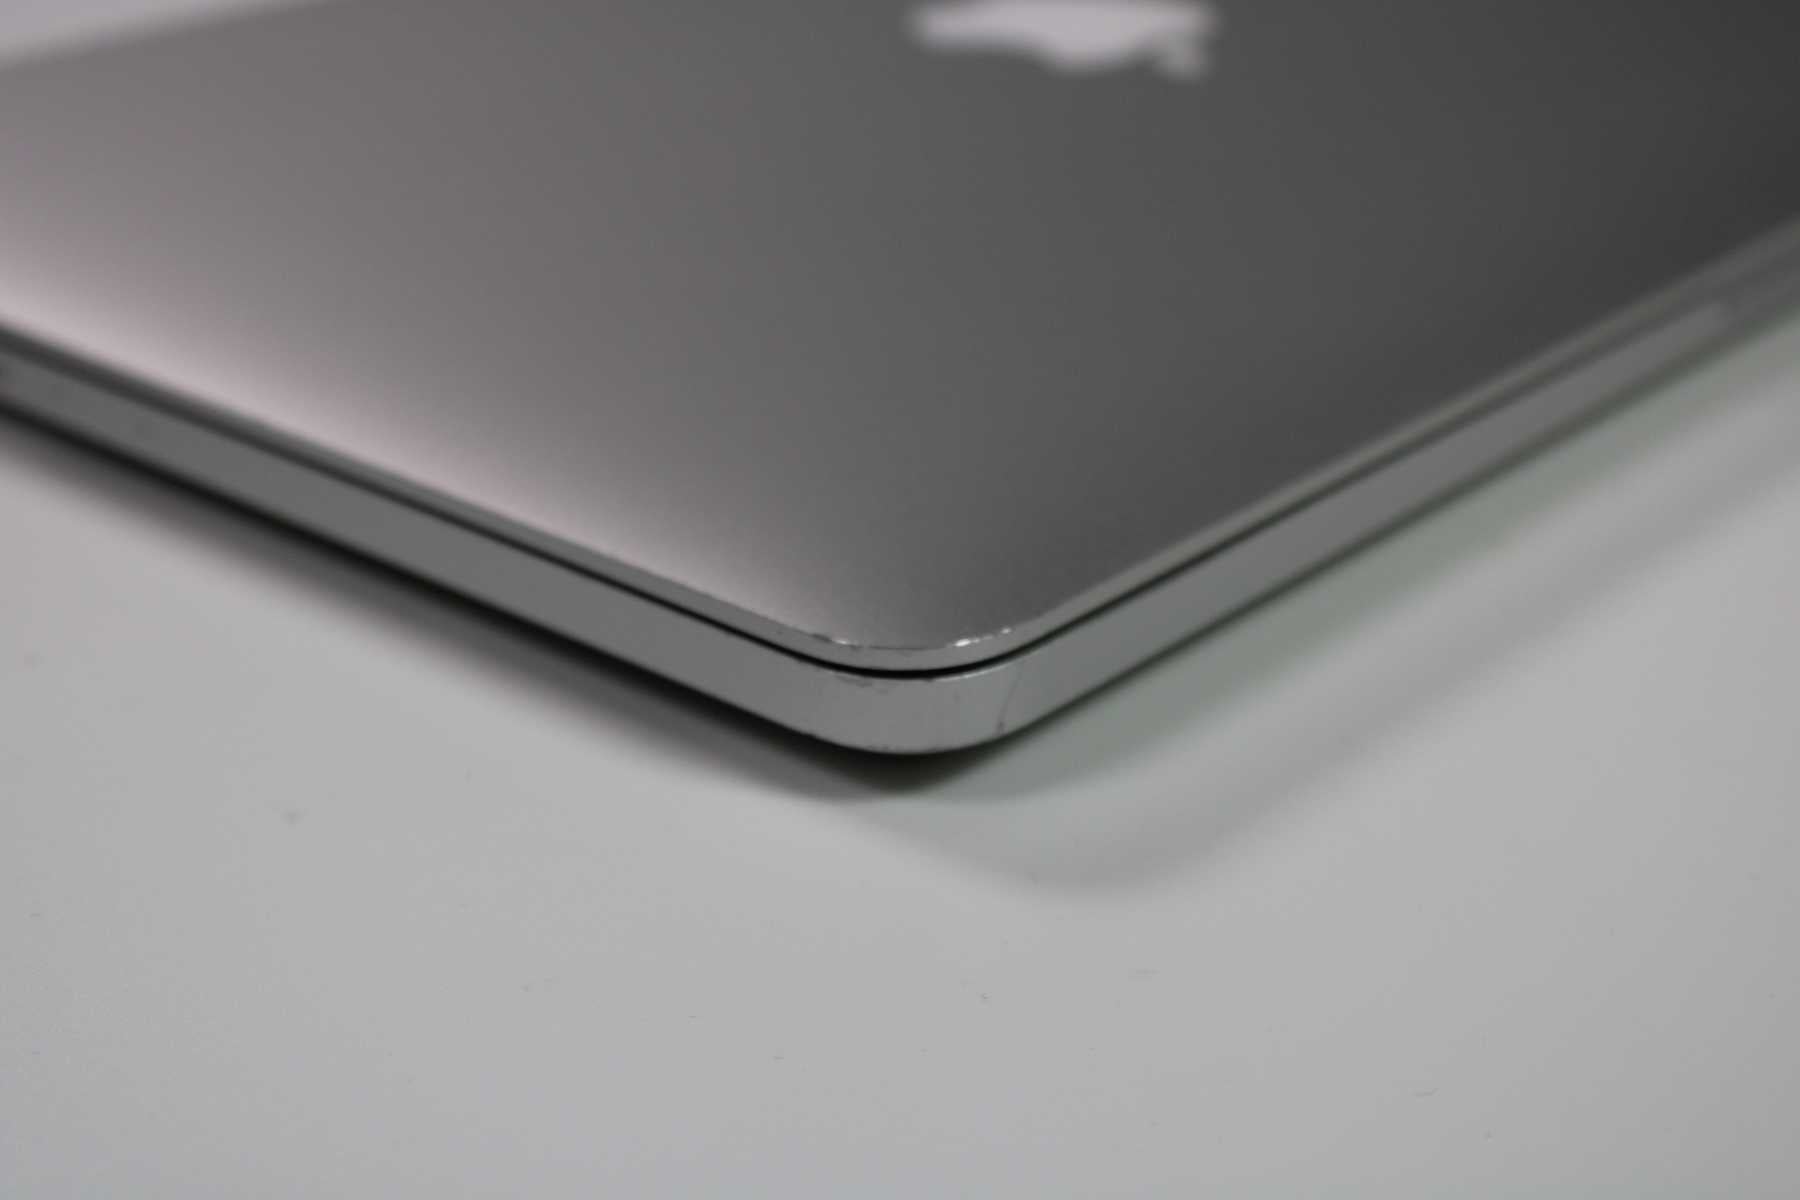 Apple MacBook Pro 13-inch 2014 2.6GHz Core i5 8GB RAM Integrated Graphics (Wear & Tear Special)